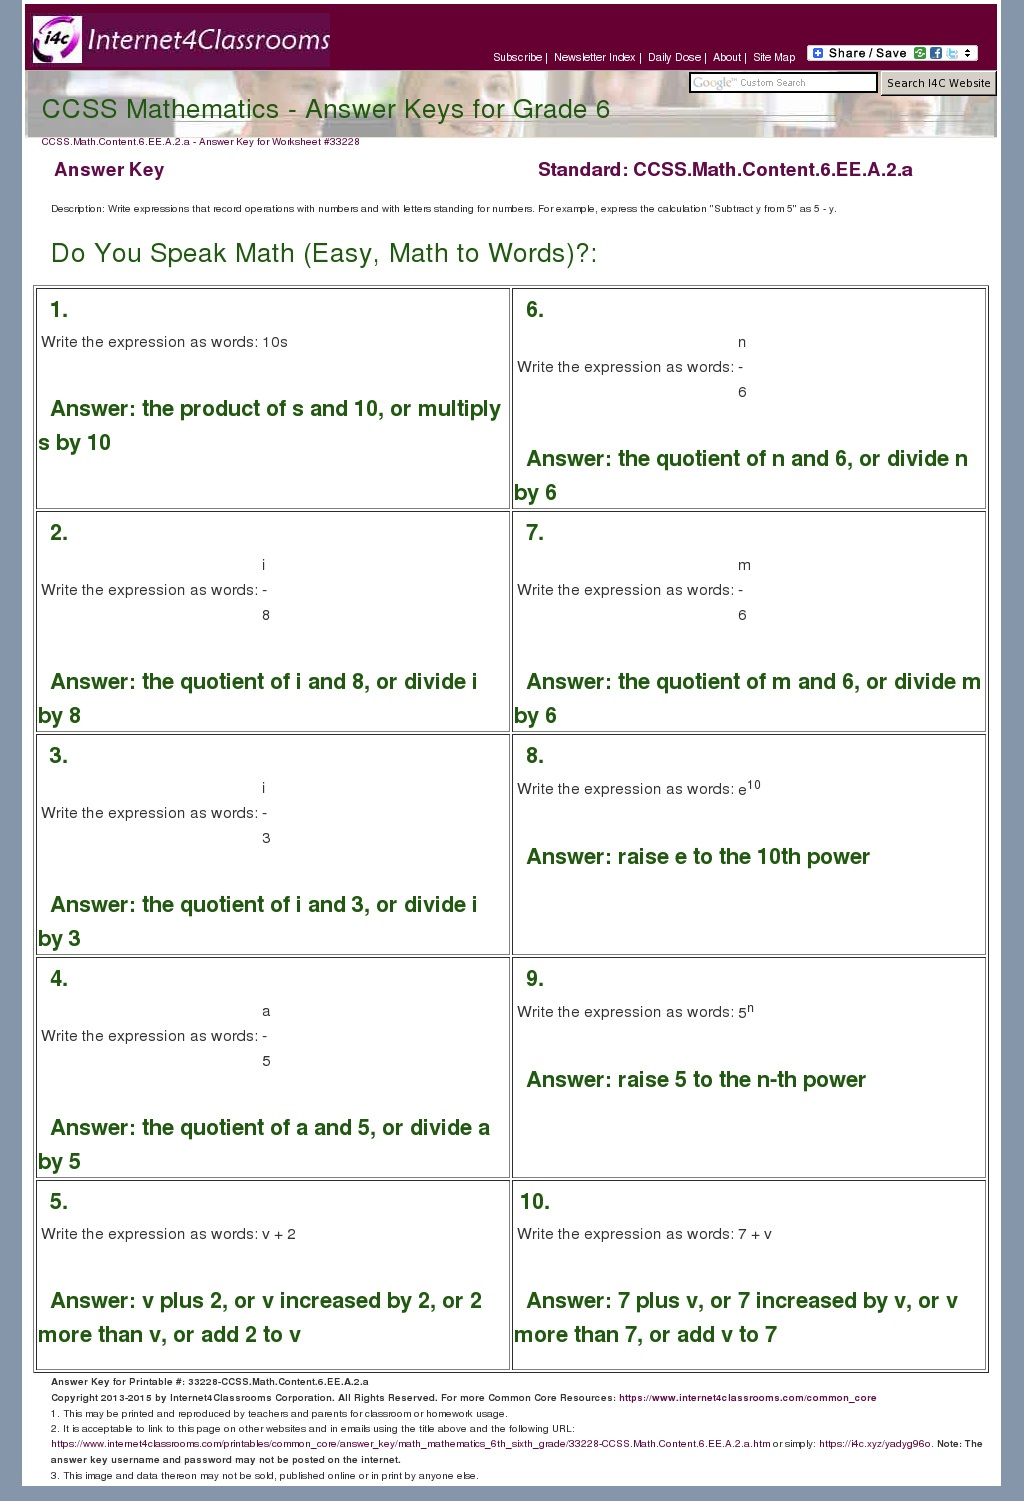 Answer Key Download Worksheet 33228 CCSS Math Content 6 EE A 2 a